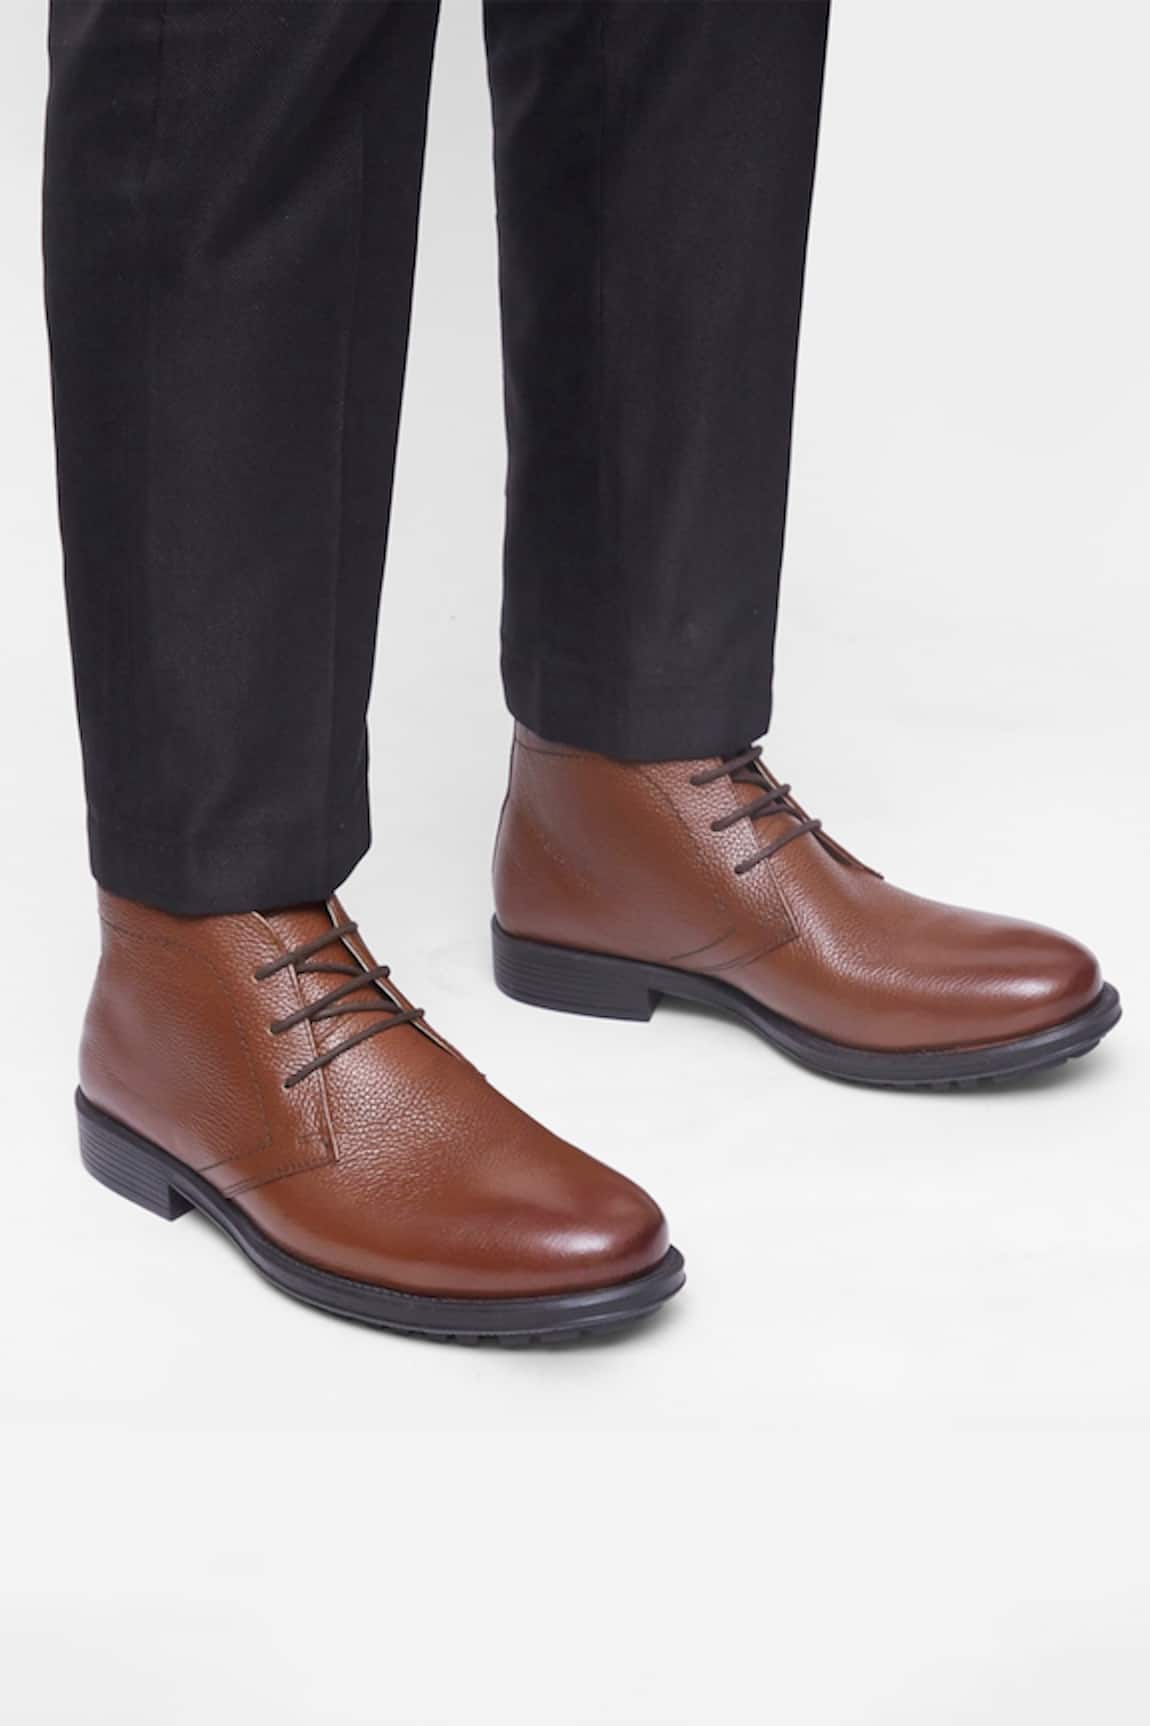 Hats Off Accessories Oily Milled Leather Chukka Boots